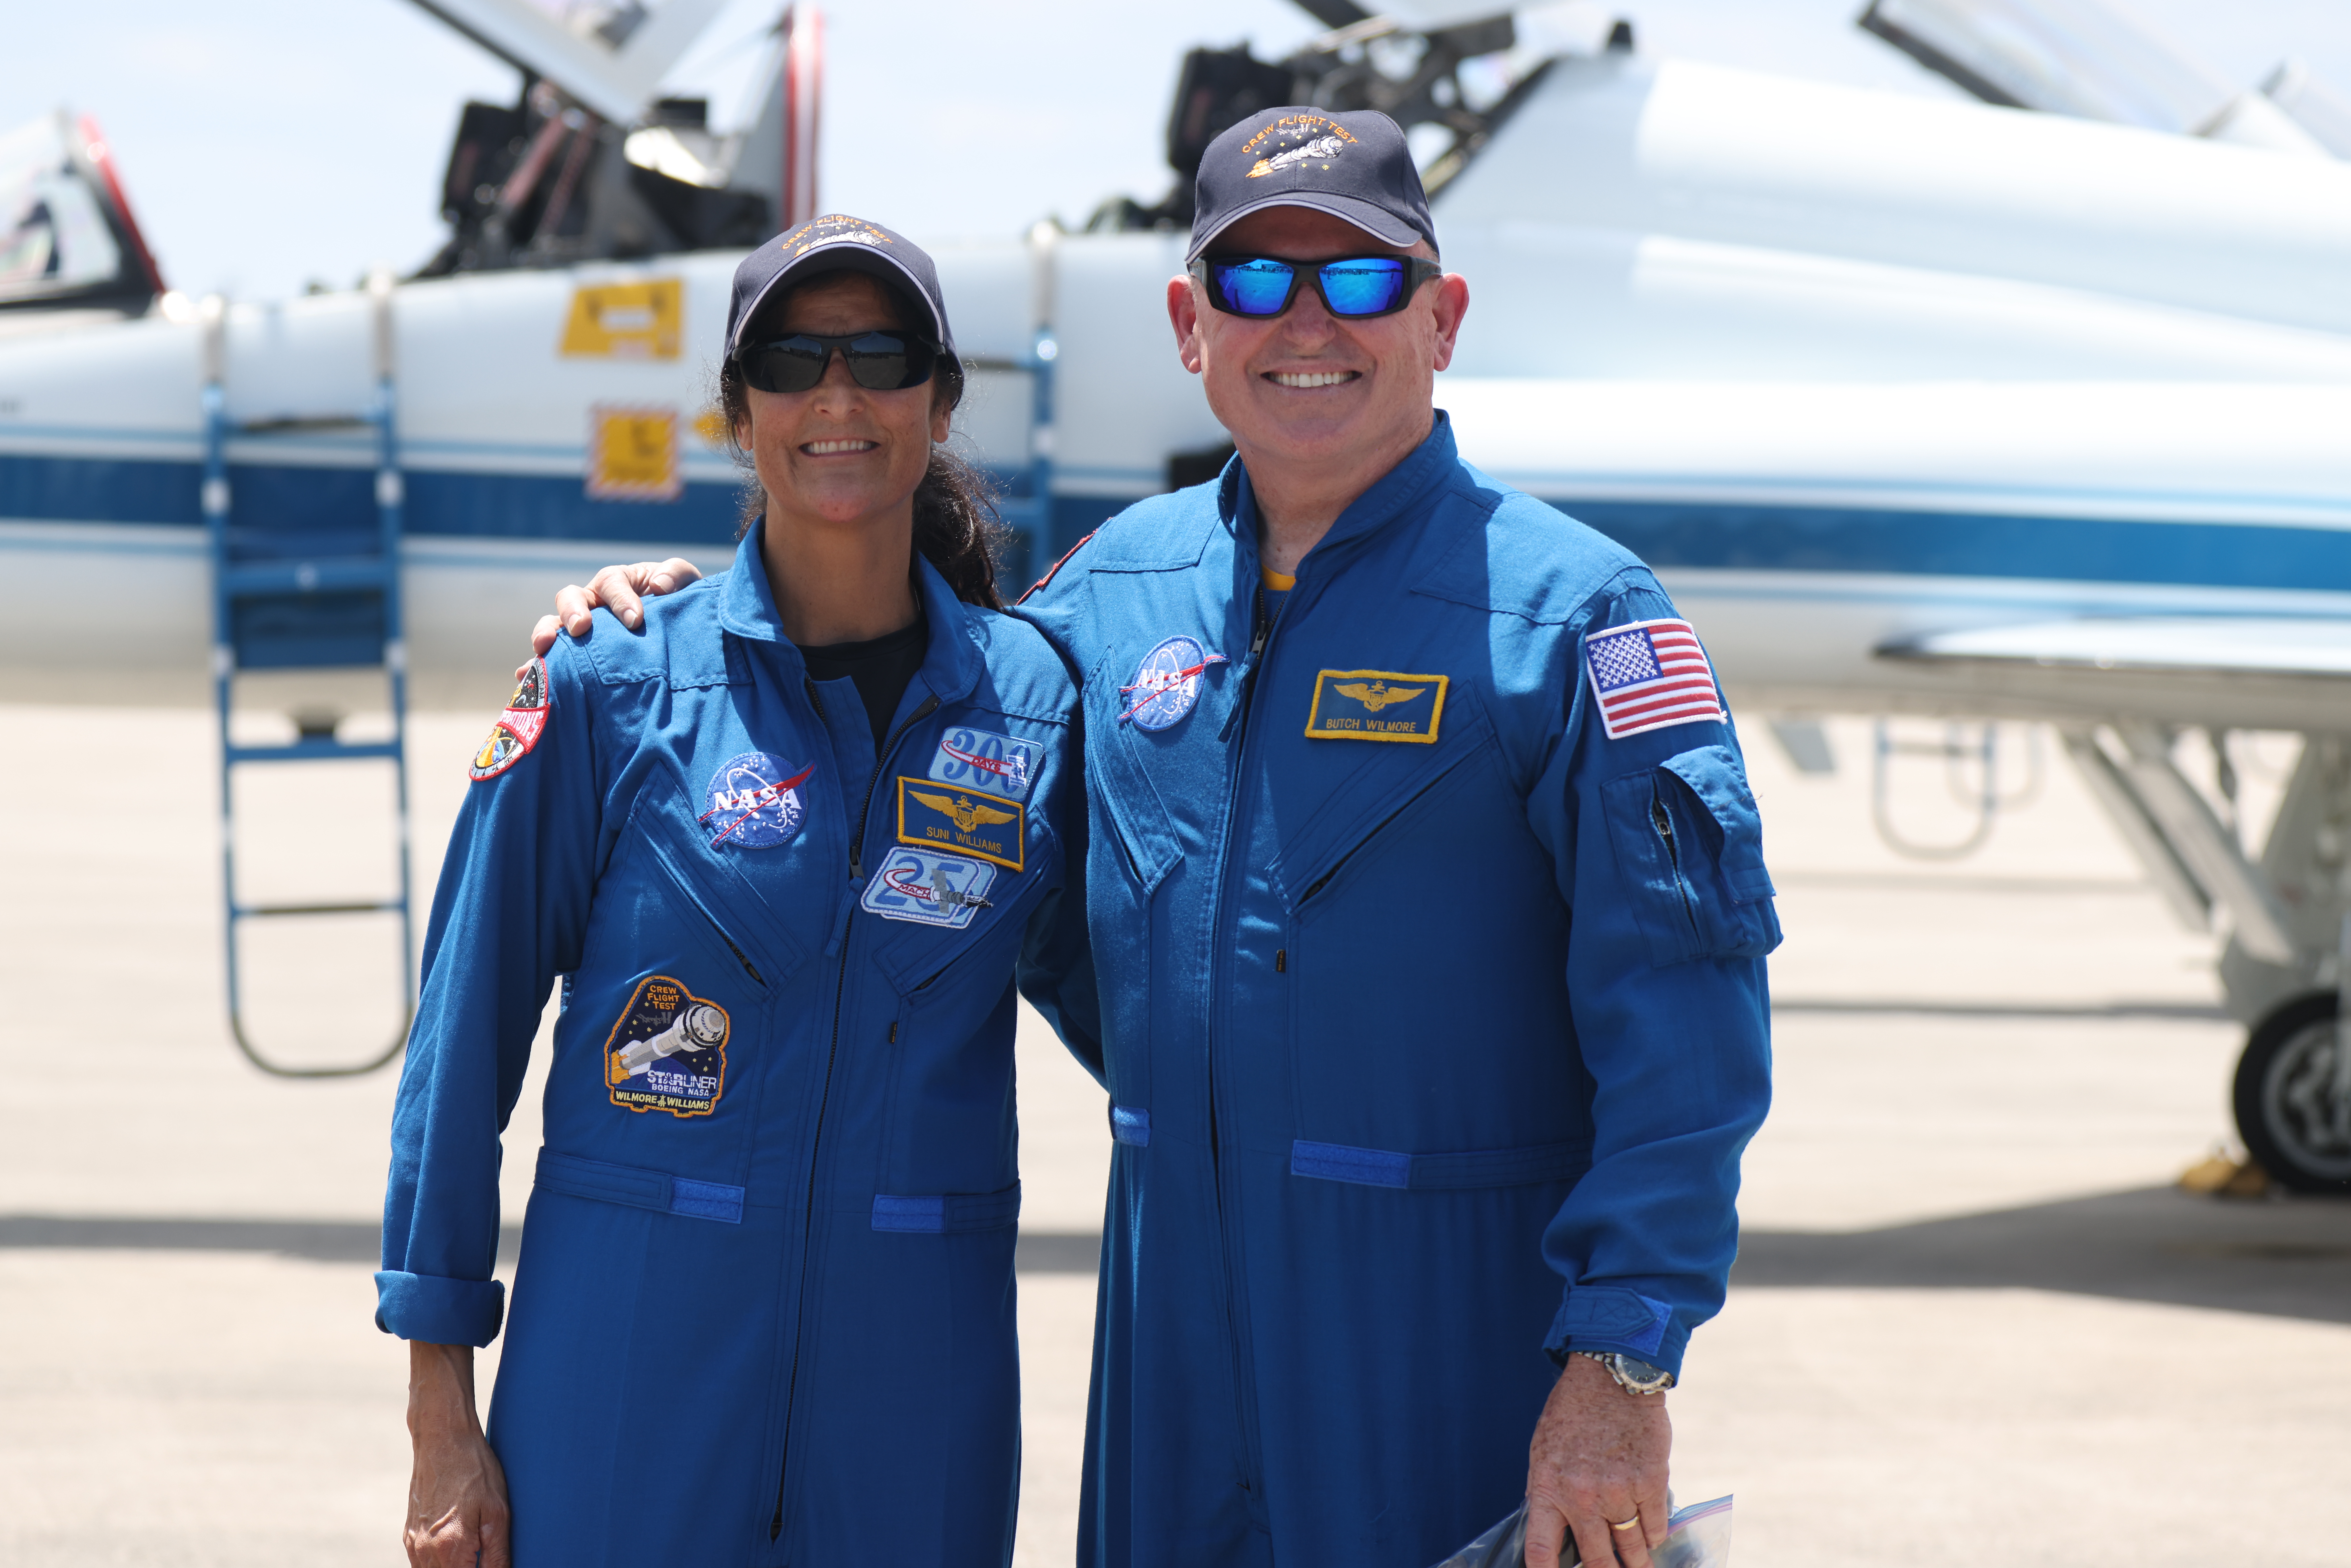 NASA astronauts Suni Williams (left) and Butch Wilmore (right)  at the Launch and Landing Facility at NASA's Kennedy Space Center in Florida